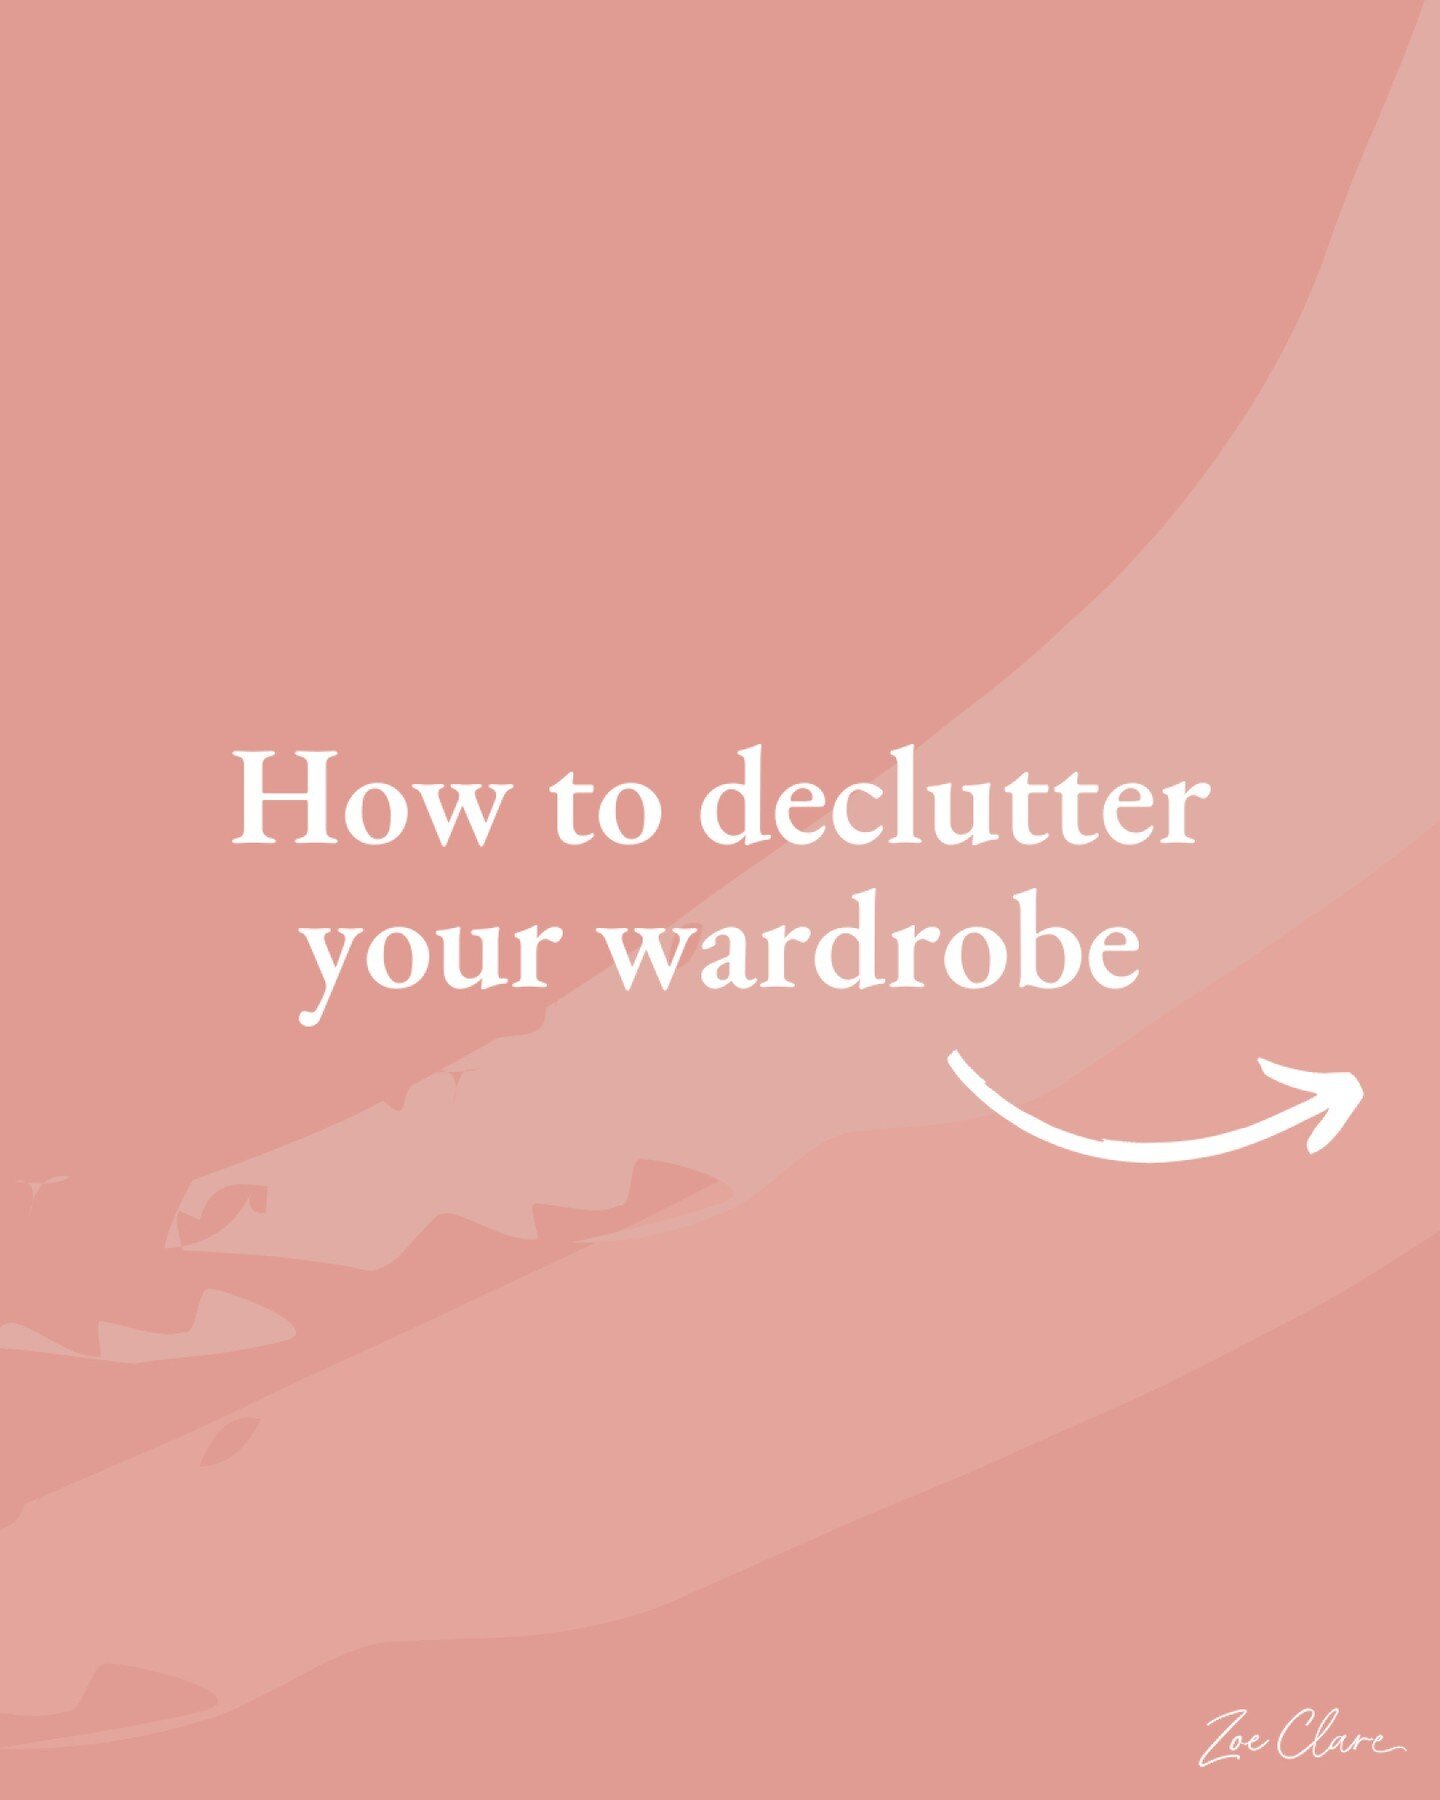 It's that time of the year again! 

Time to declutter your wardrobe and fall back in love with getting dressed everyday.

The goal of your wardrobe clean out is to create a collection of clothing that reflects your lifestyle, body shape, and personal